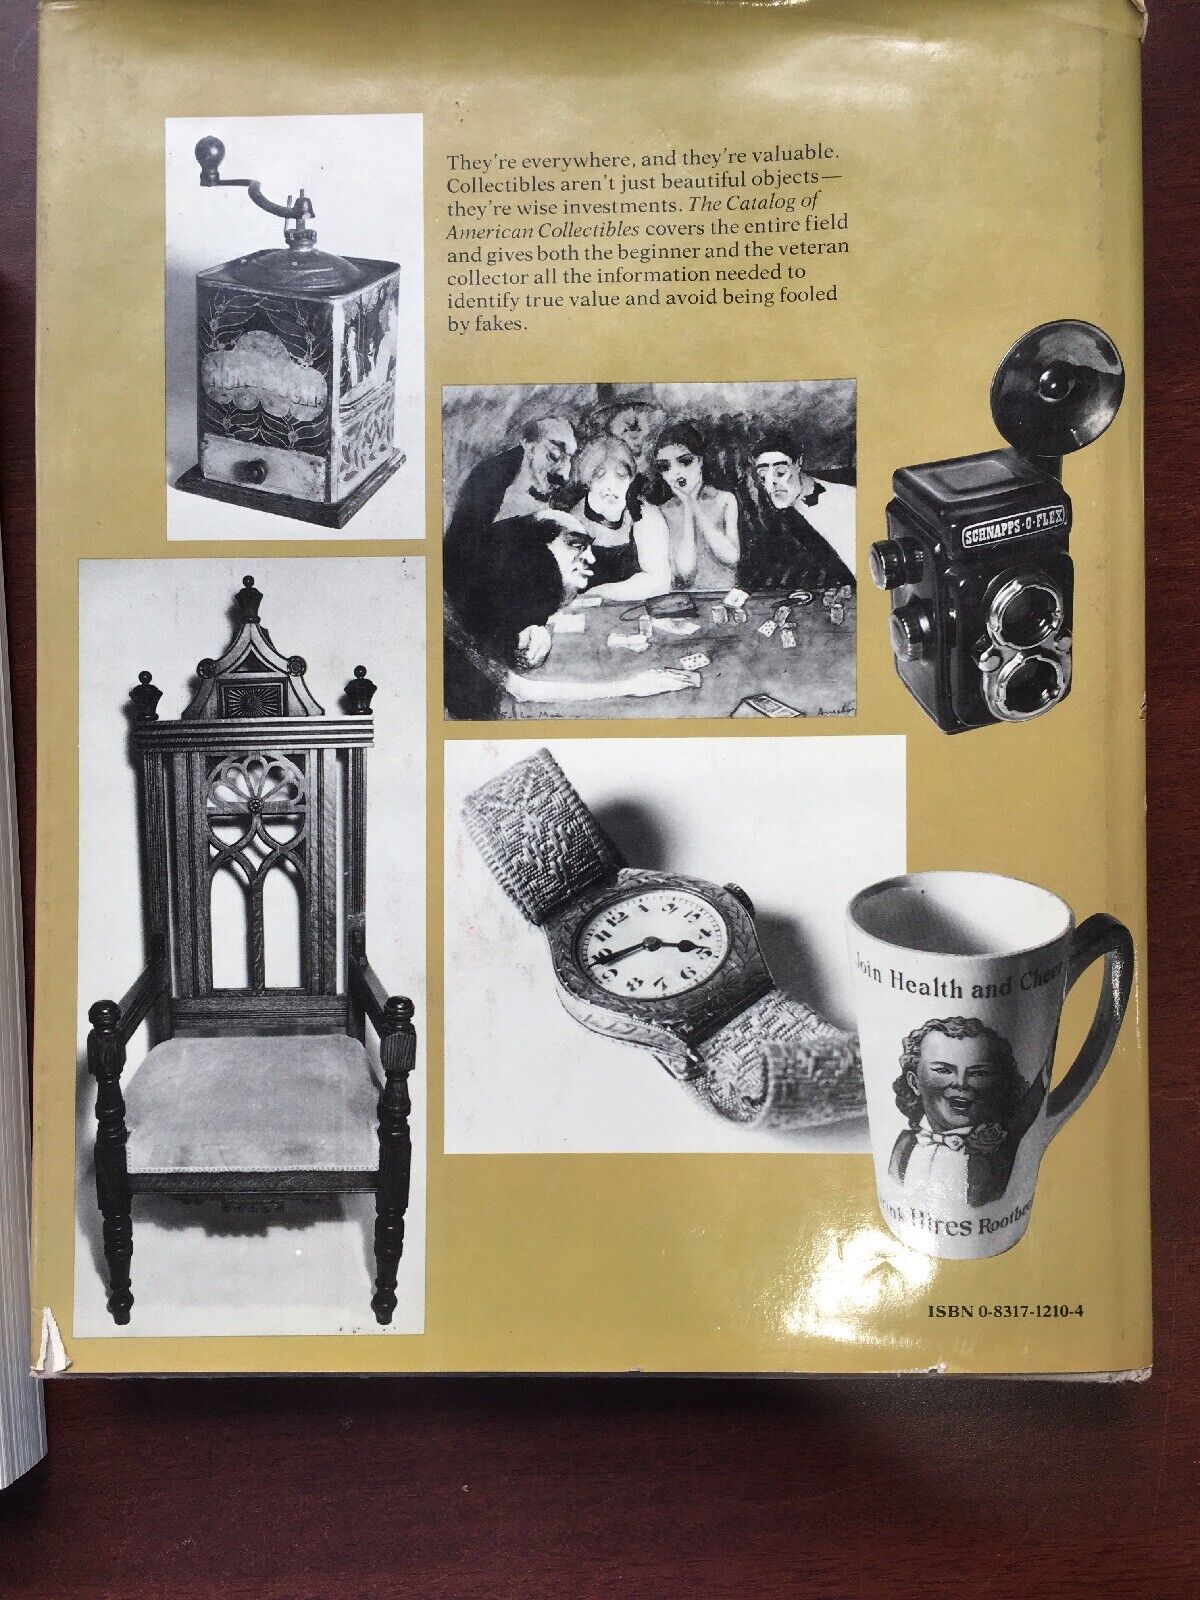 Mix To Book Light Country Americana Grotz’s Antique Guide American Collectibles Без бренда - фотография #5